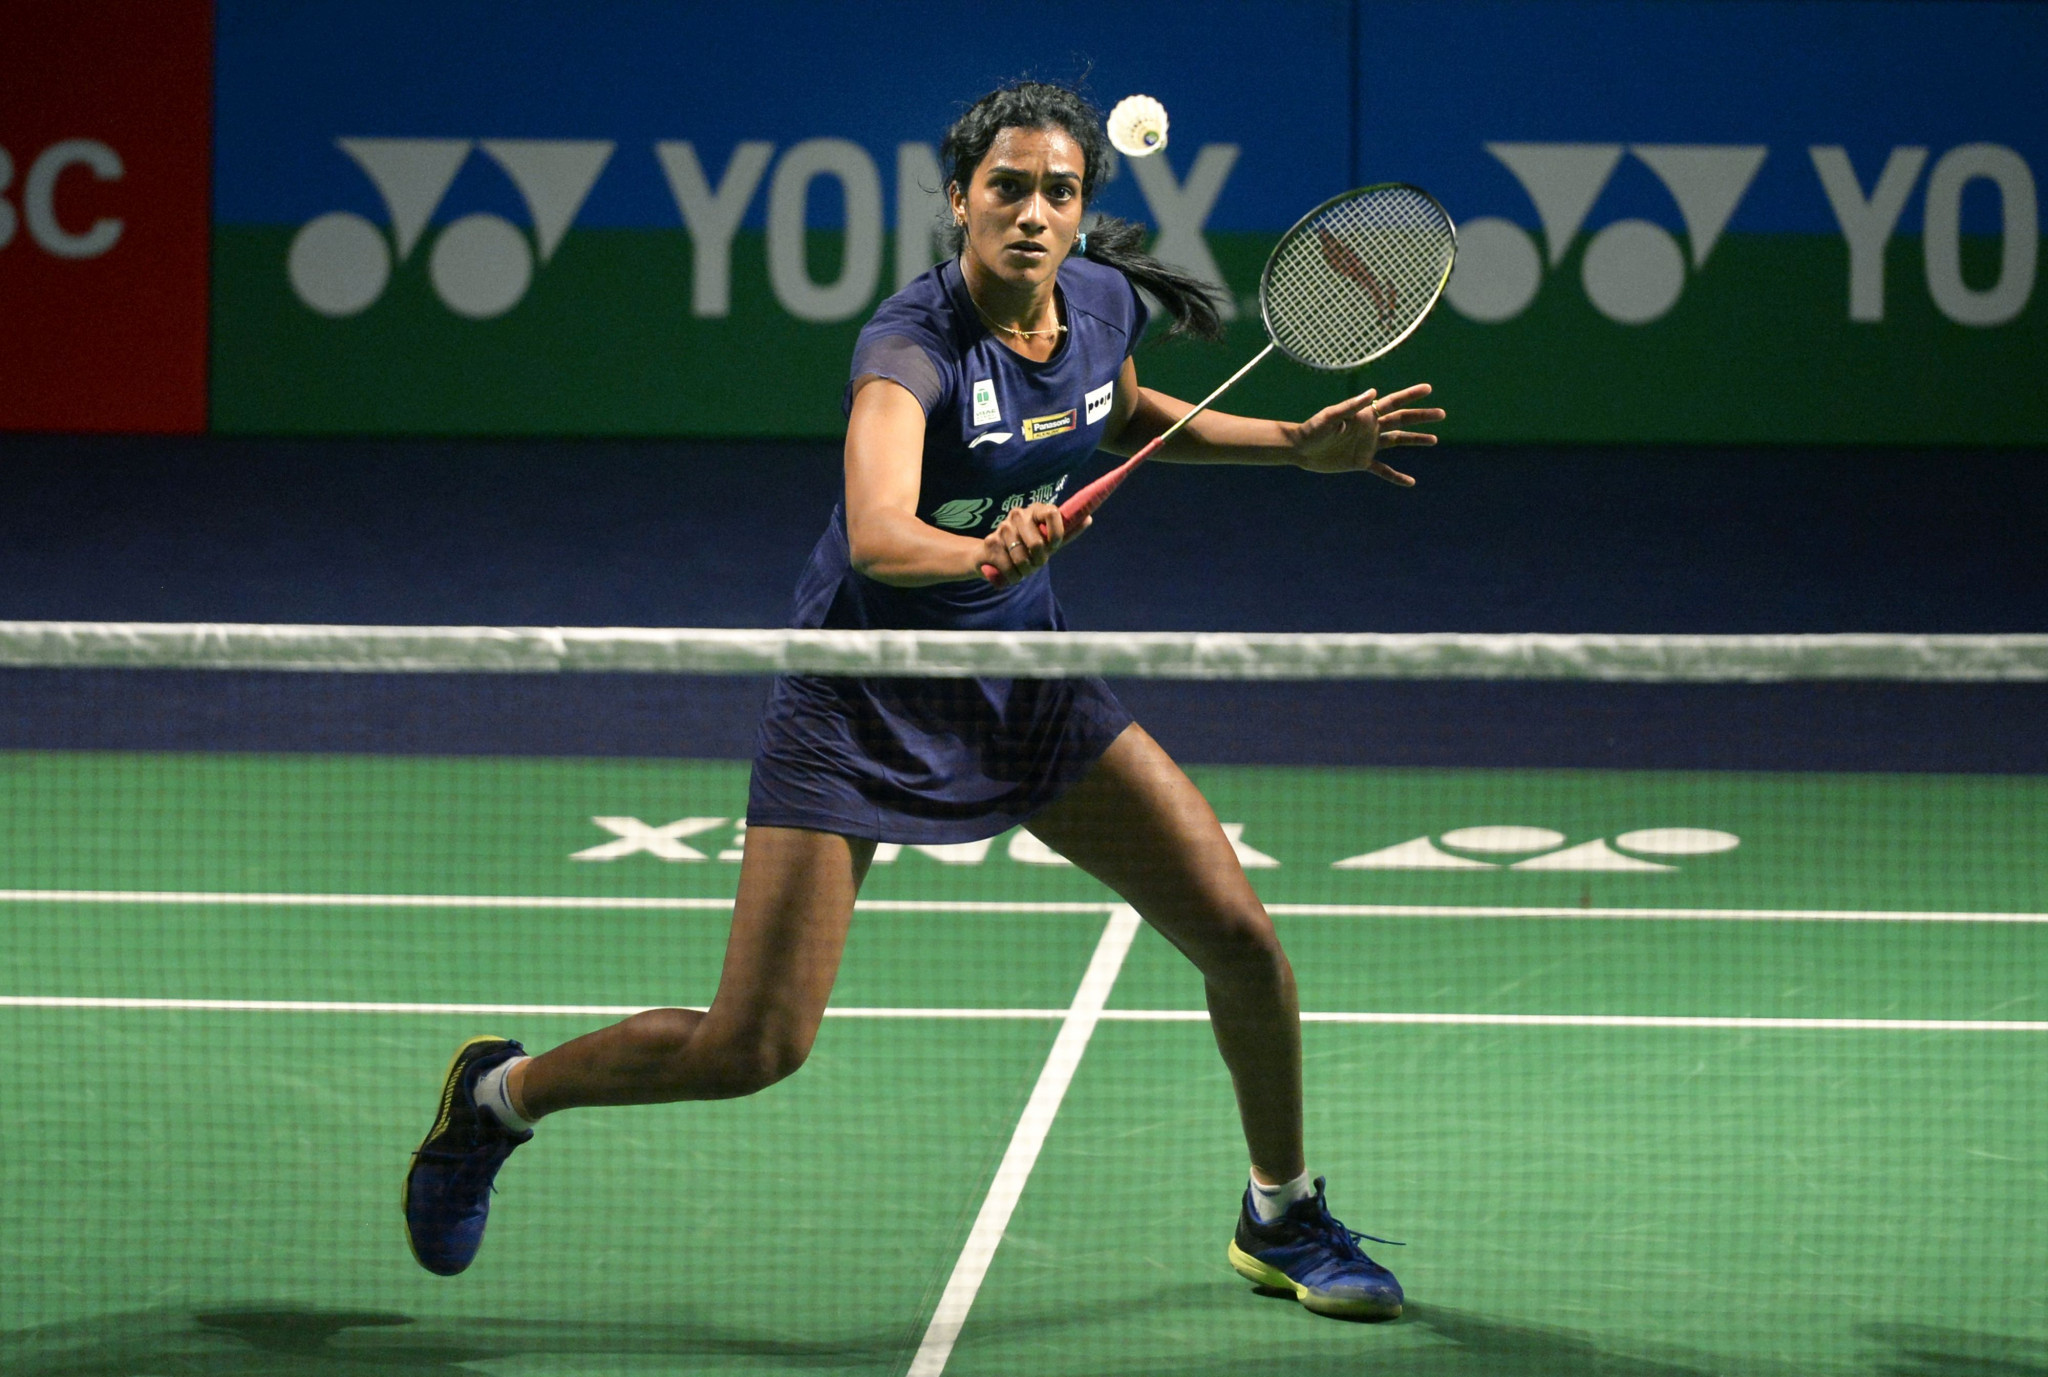 The Indian coach said changes made by the BWF had caused a spike in the number of injuries among players ©Getty Images